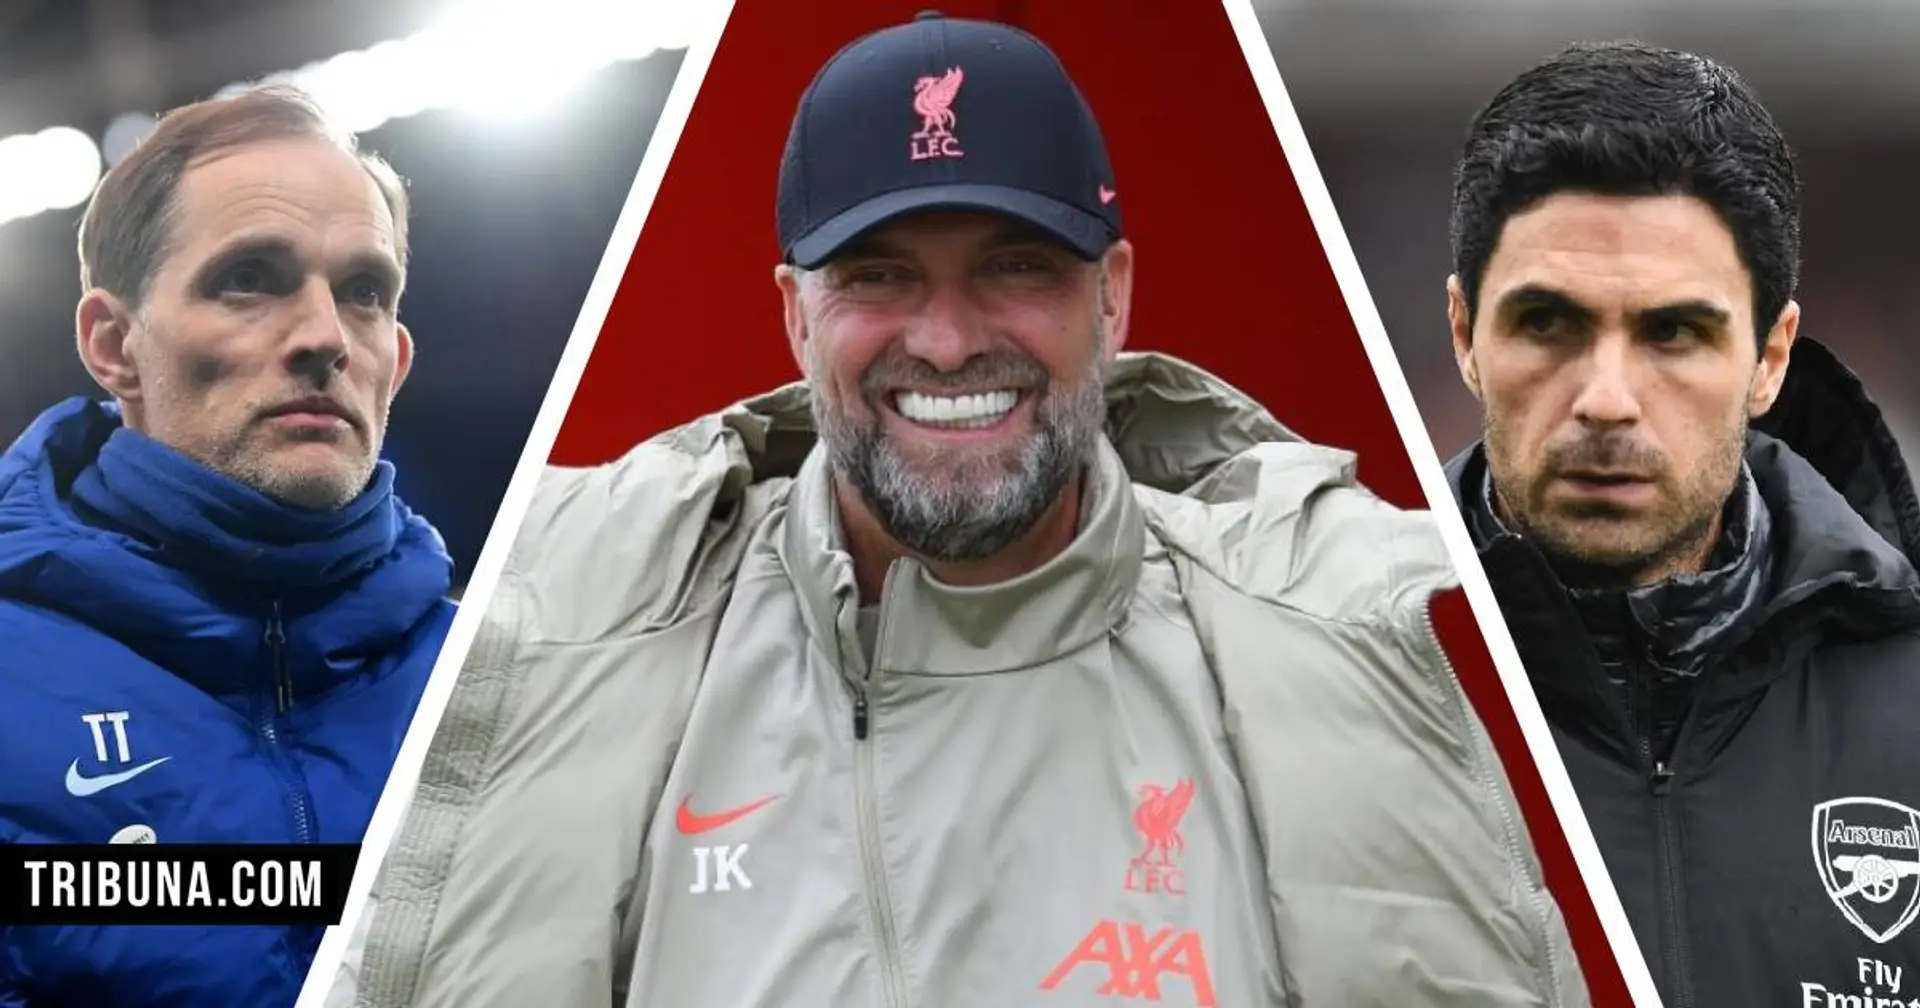 Final 8 is set - Liverpool's potential opponents for Carabao Cup quarter-finals revealed